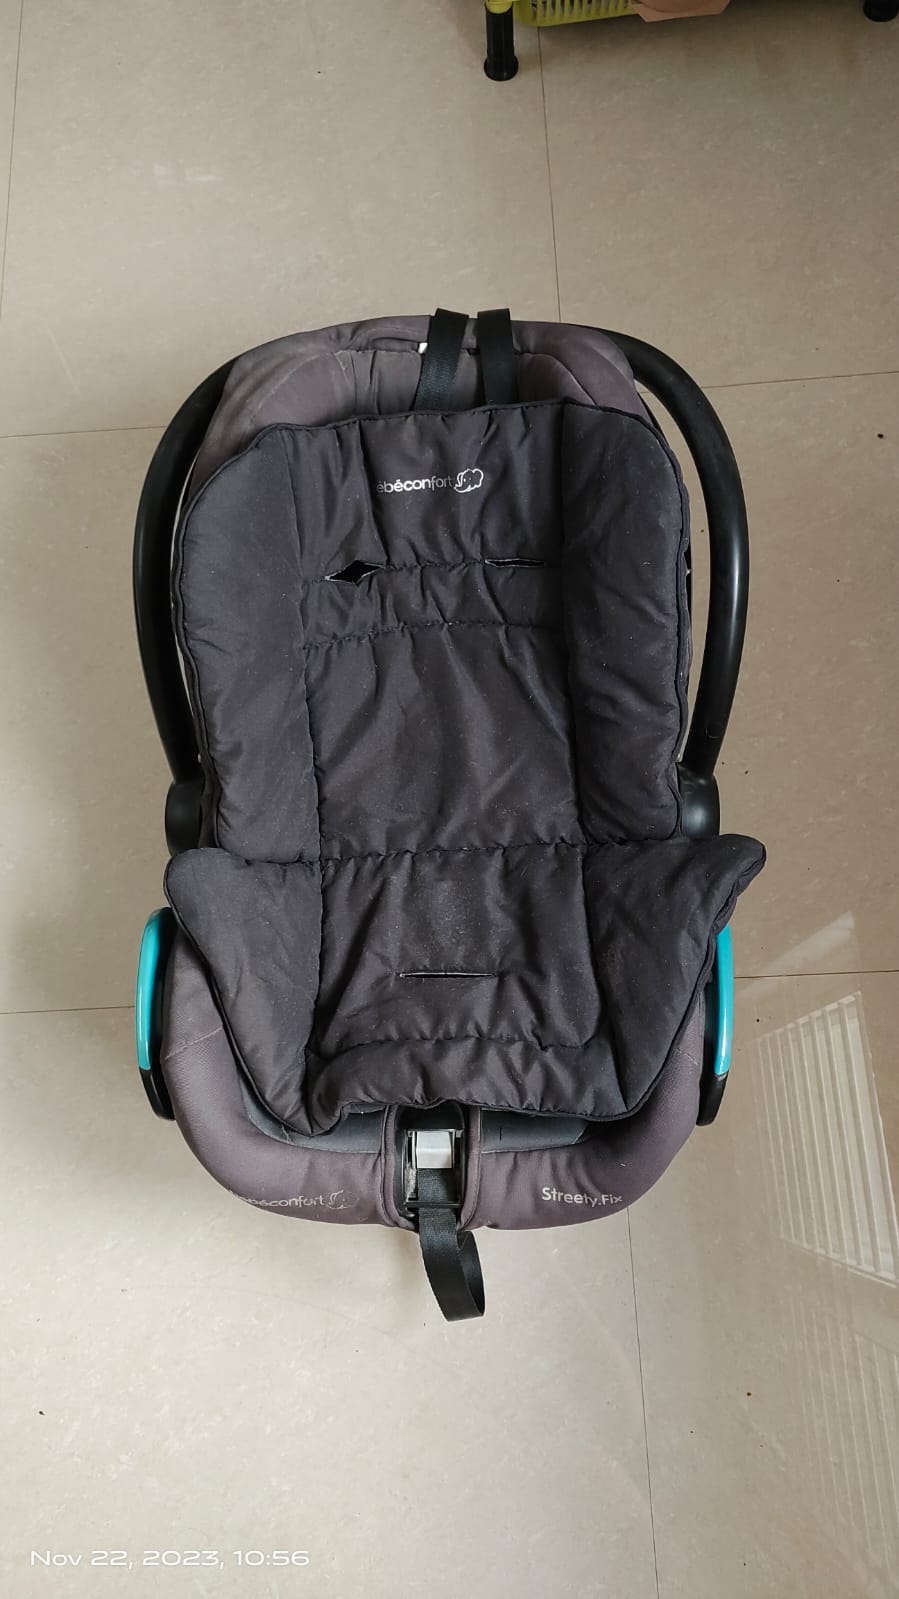 Strollberry Stroller & Carry Cot